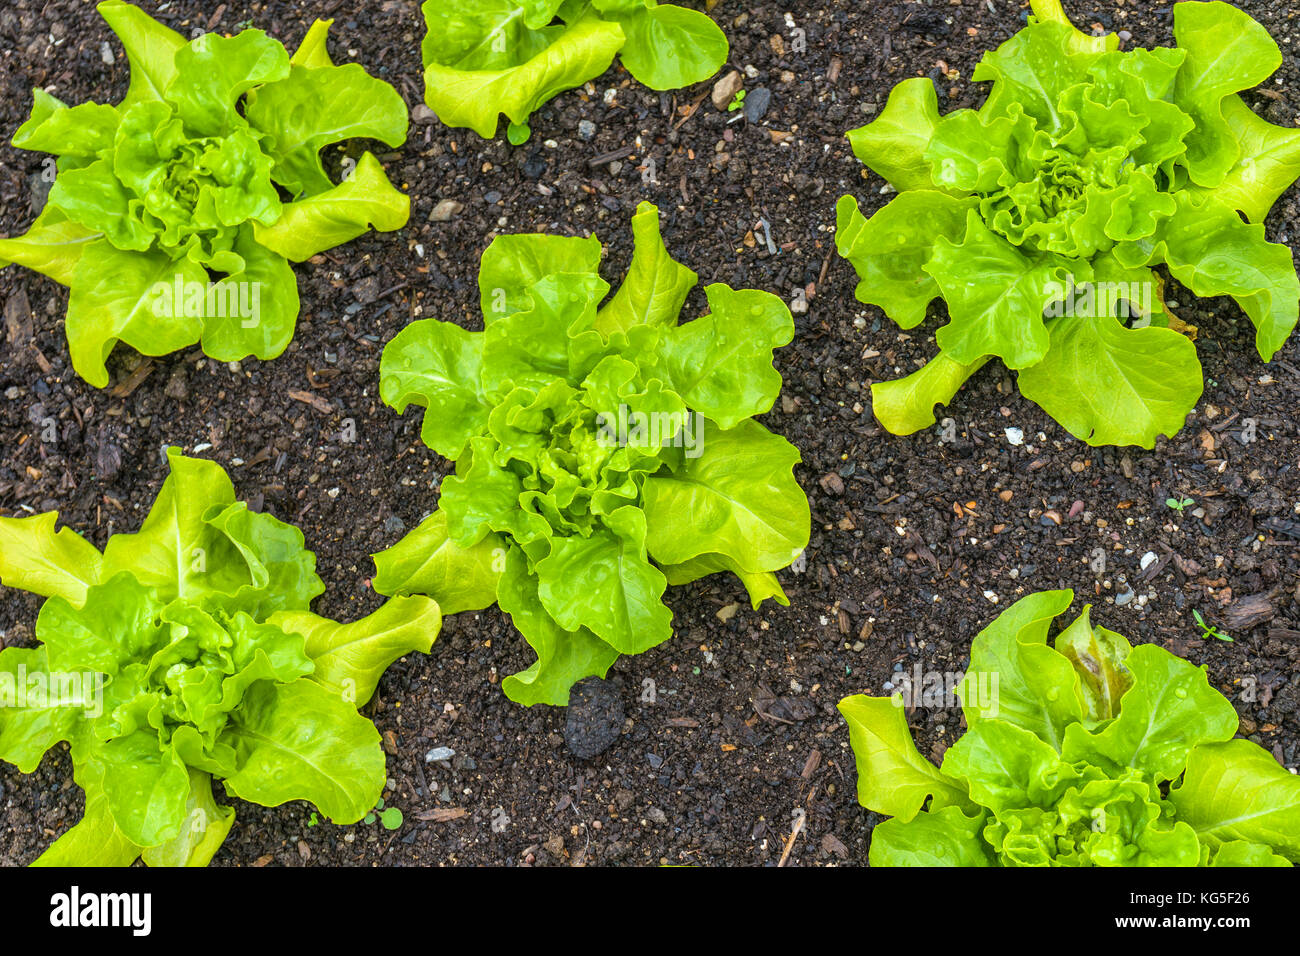 Green Leaf lettuces are a group of lettuce cultivars with green leaves. Stock Photo